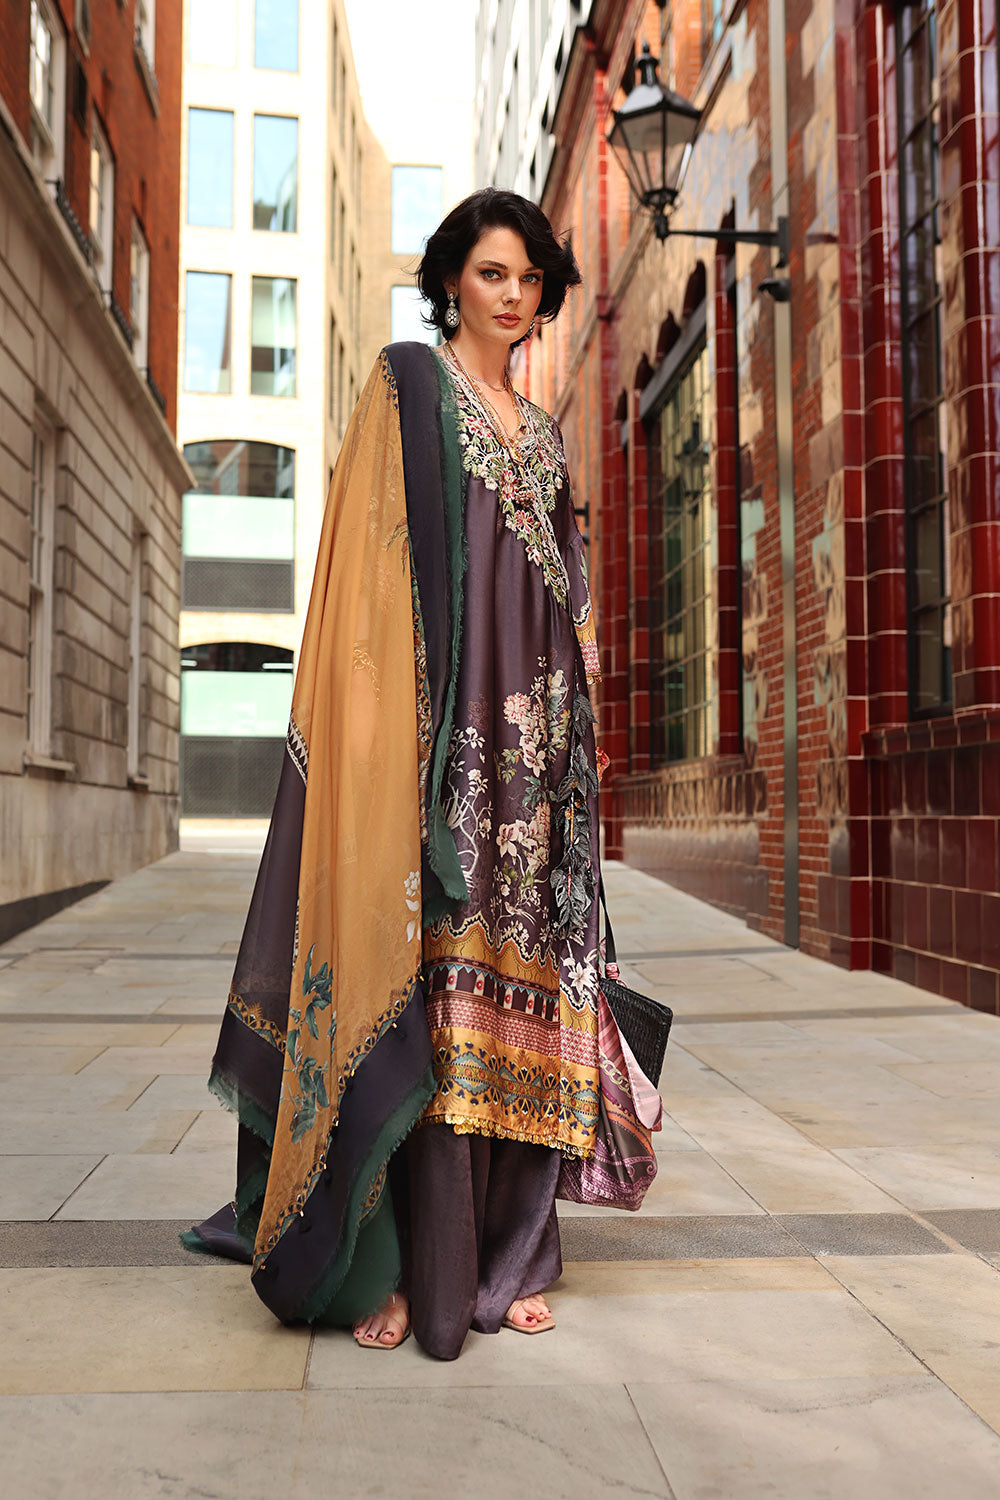 Buy Now, D#1 - Silk Collection - Sobia Nazir - Fall 2023 - Shahana Collection - Wedding and Bridal Party Dresses - Shahana UK - Pakistani Designer Wear in UK